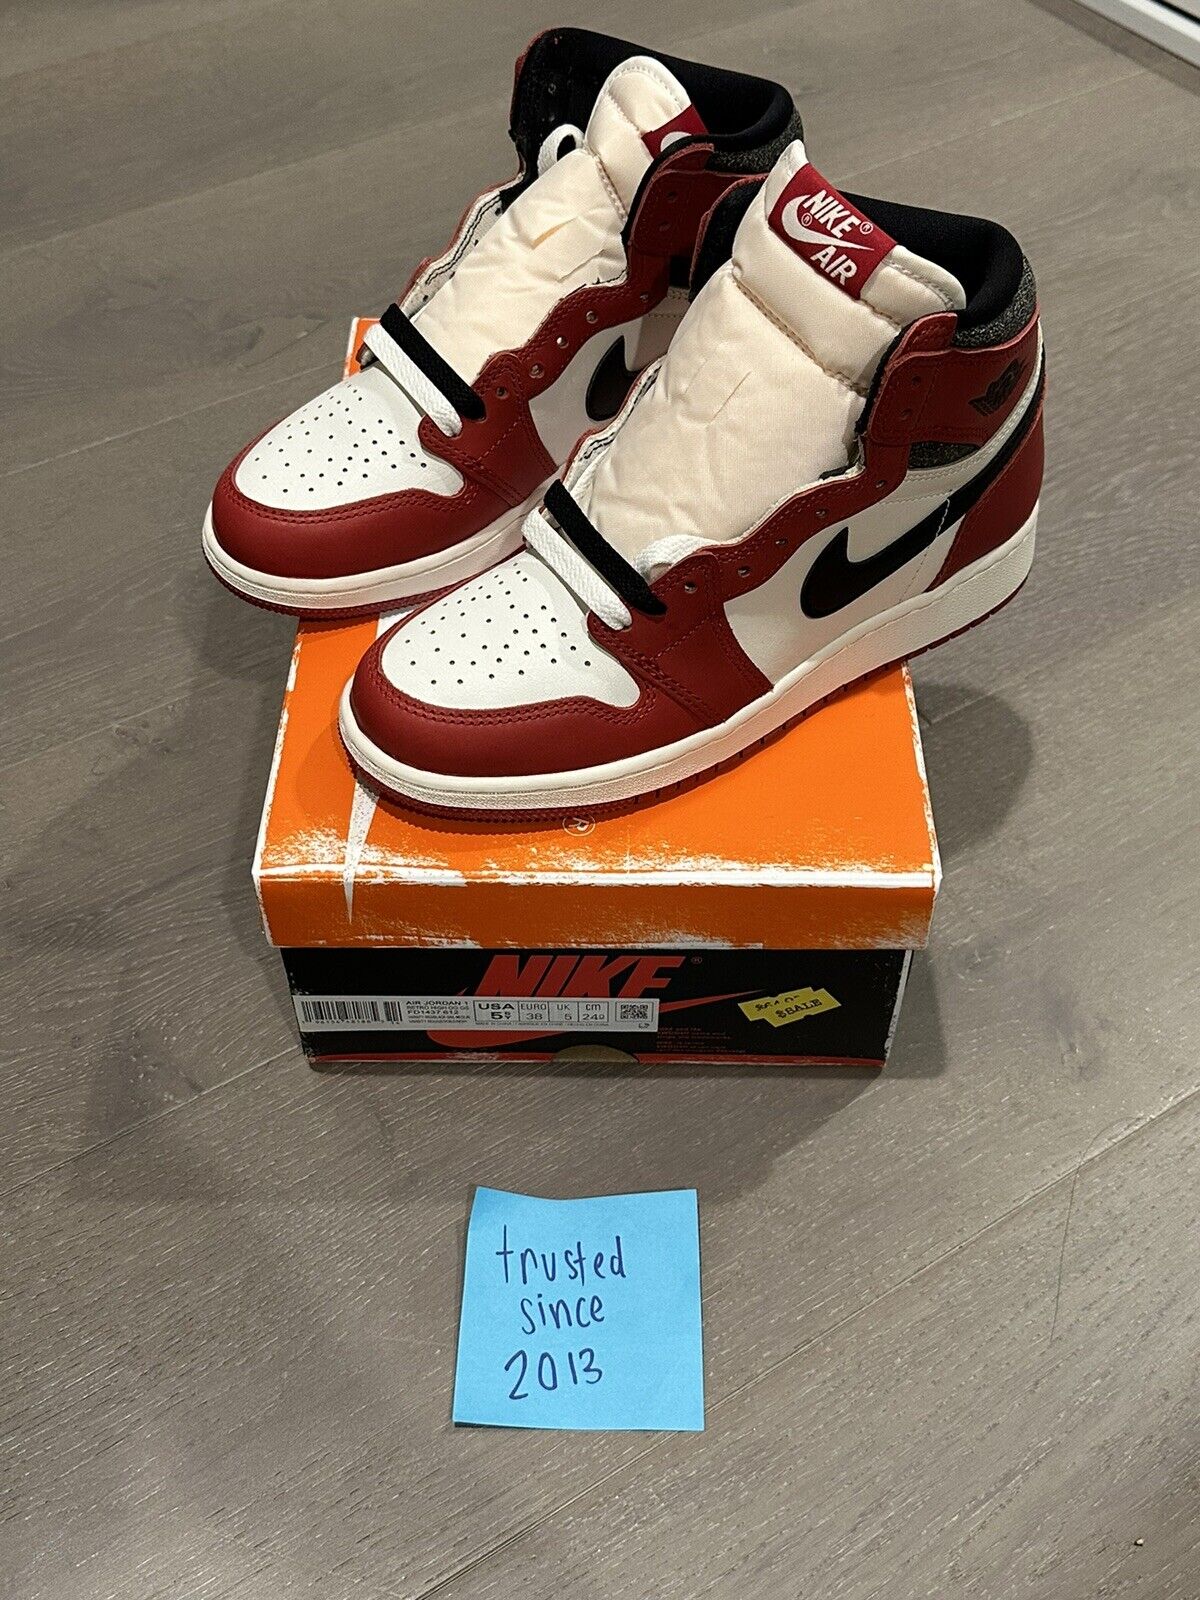 Nike Air Jordan 1 Retro High OG Chicago Lost and Found GS Size 